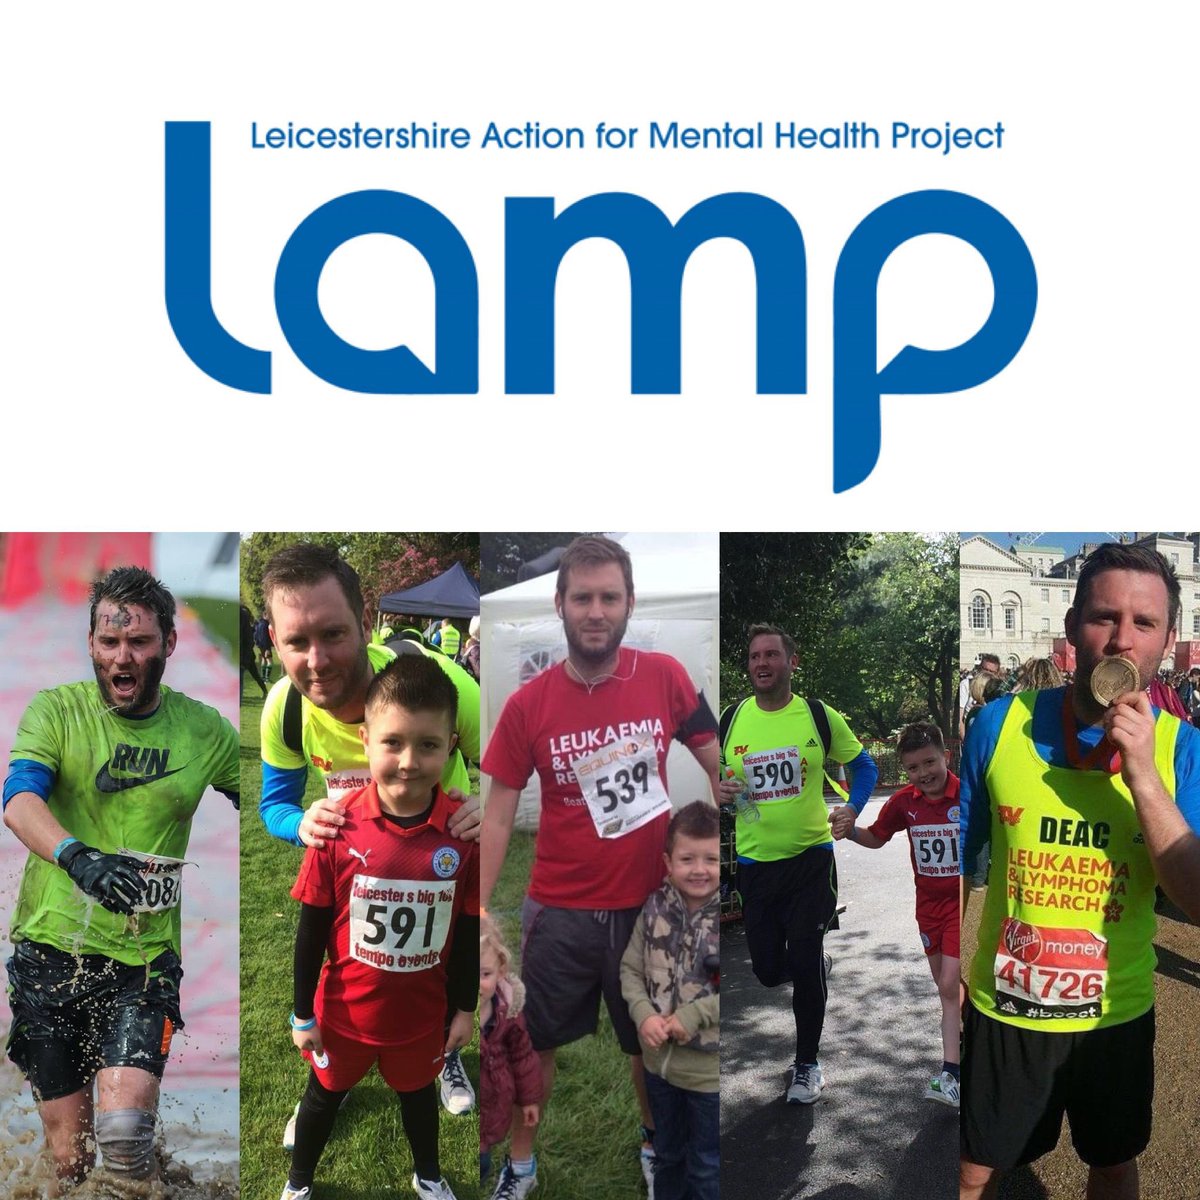 I’m dusting off my running shoes for @LAMPCharity_ I’ll be running 50 miles in 5 days (May 13th to May 17th) before taking on @greghollingswth’s legendary Lamp 5k I’m no @hardestgeezer but any support towards Mental Health advocacy would be amazing. TY justgiving.com/page/liam-deac…